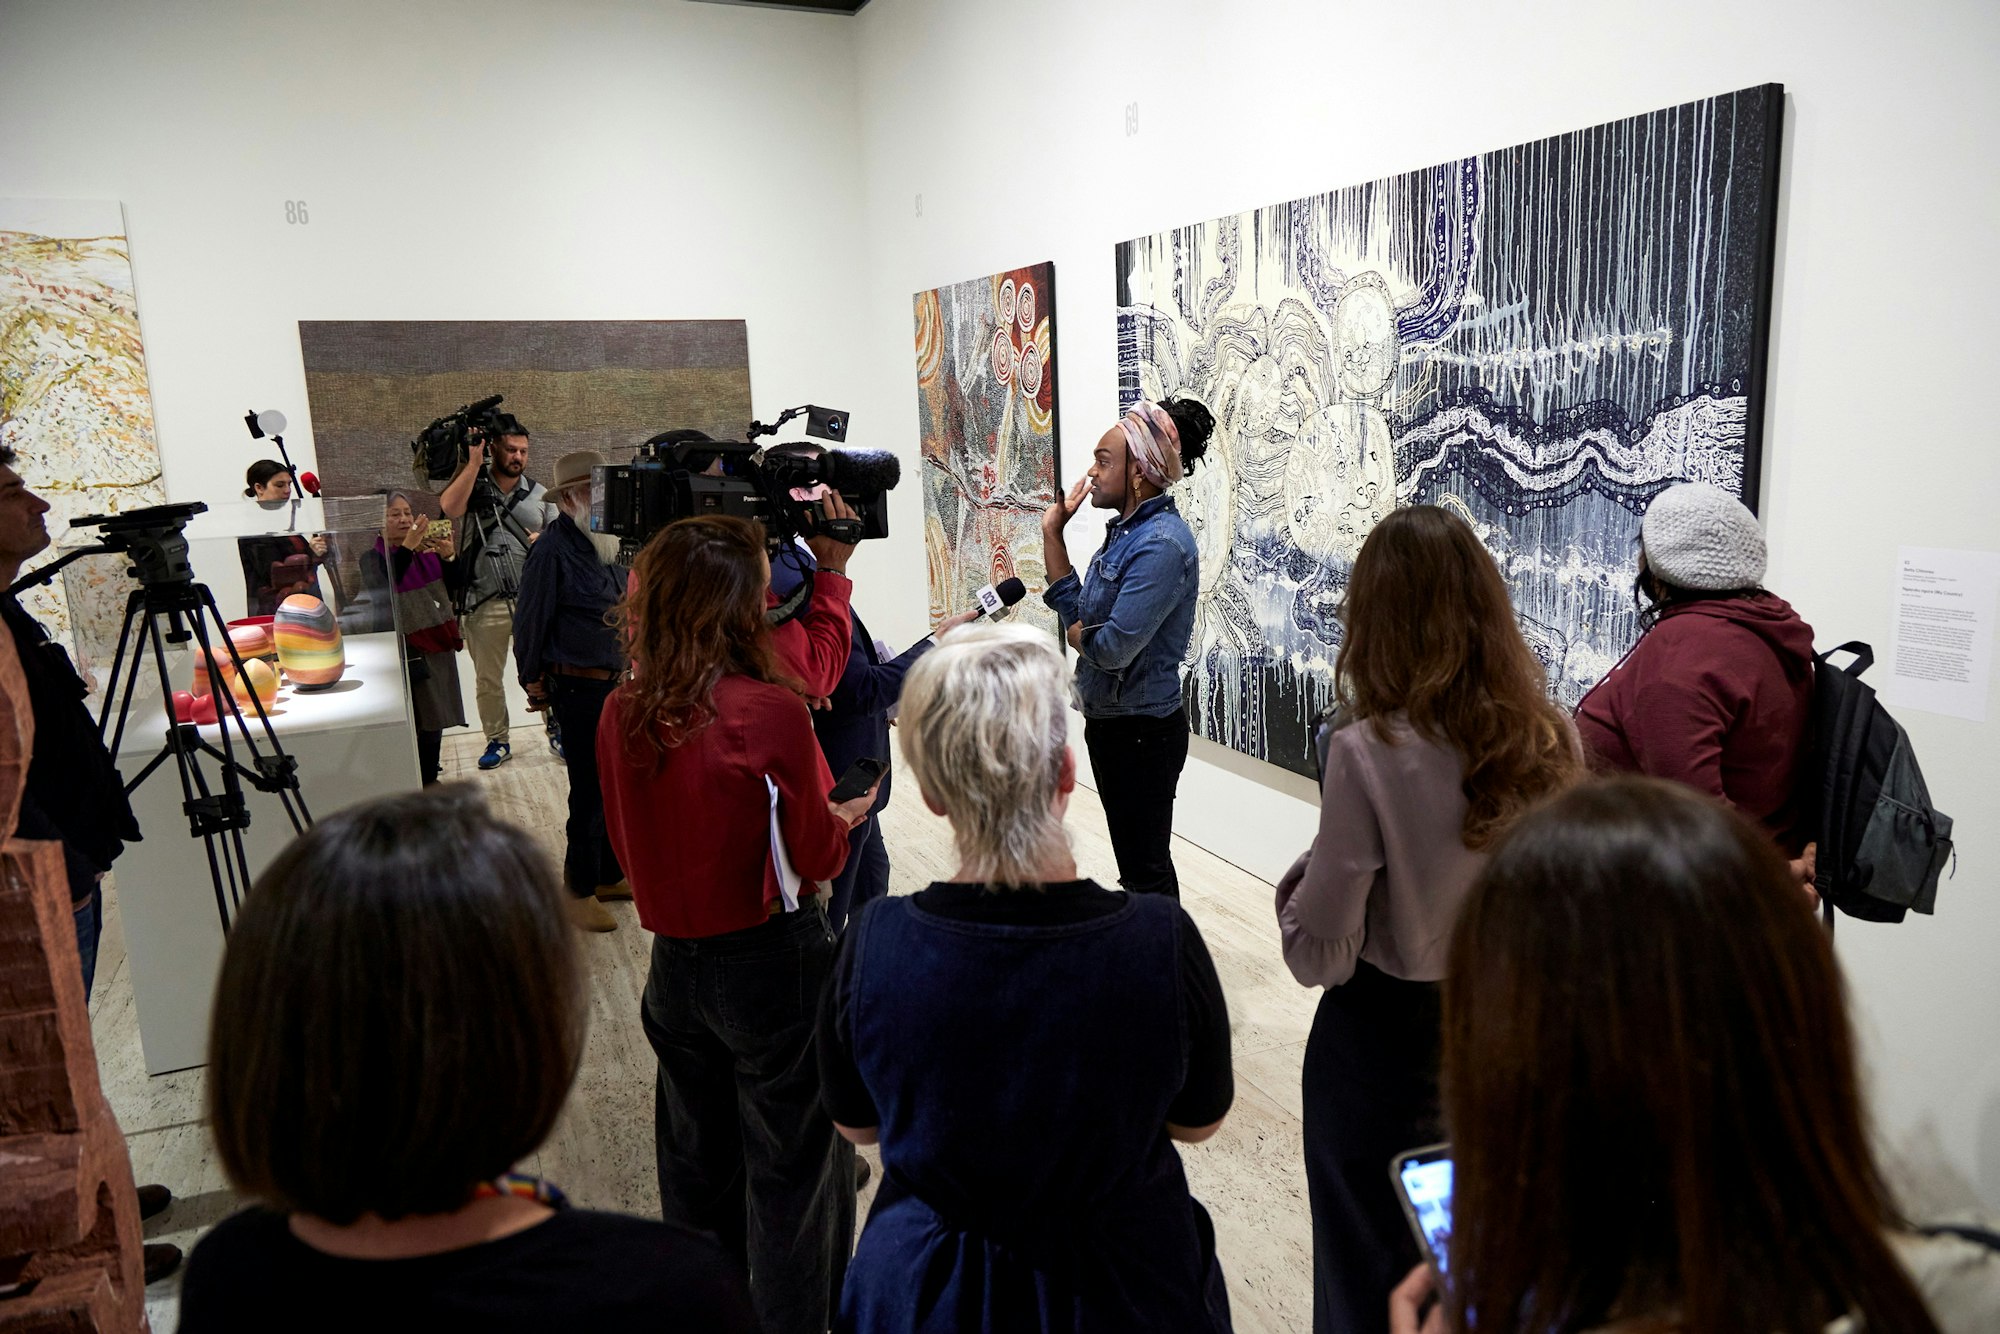 A person stands with a large black and white painting in front of a group of people, some with cameras